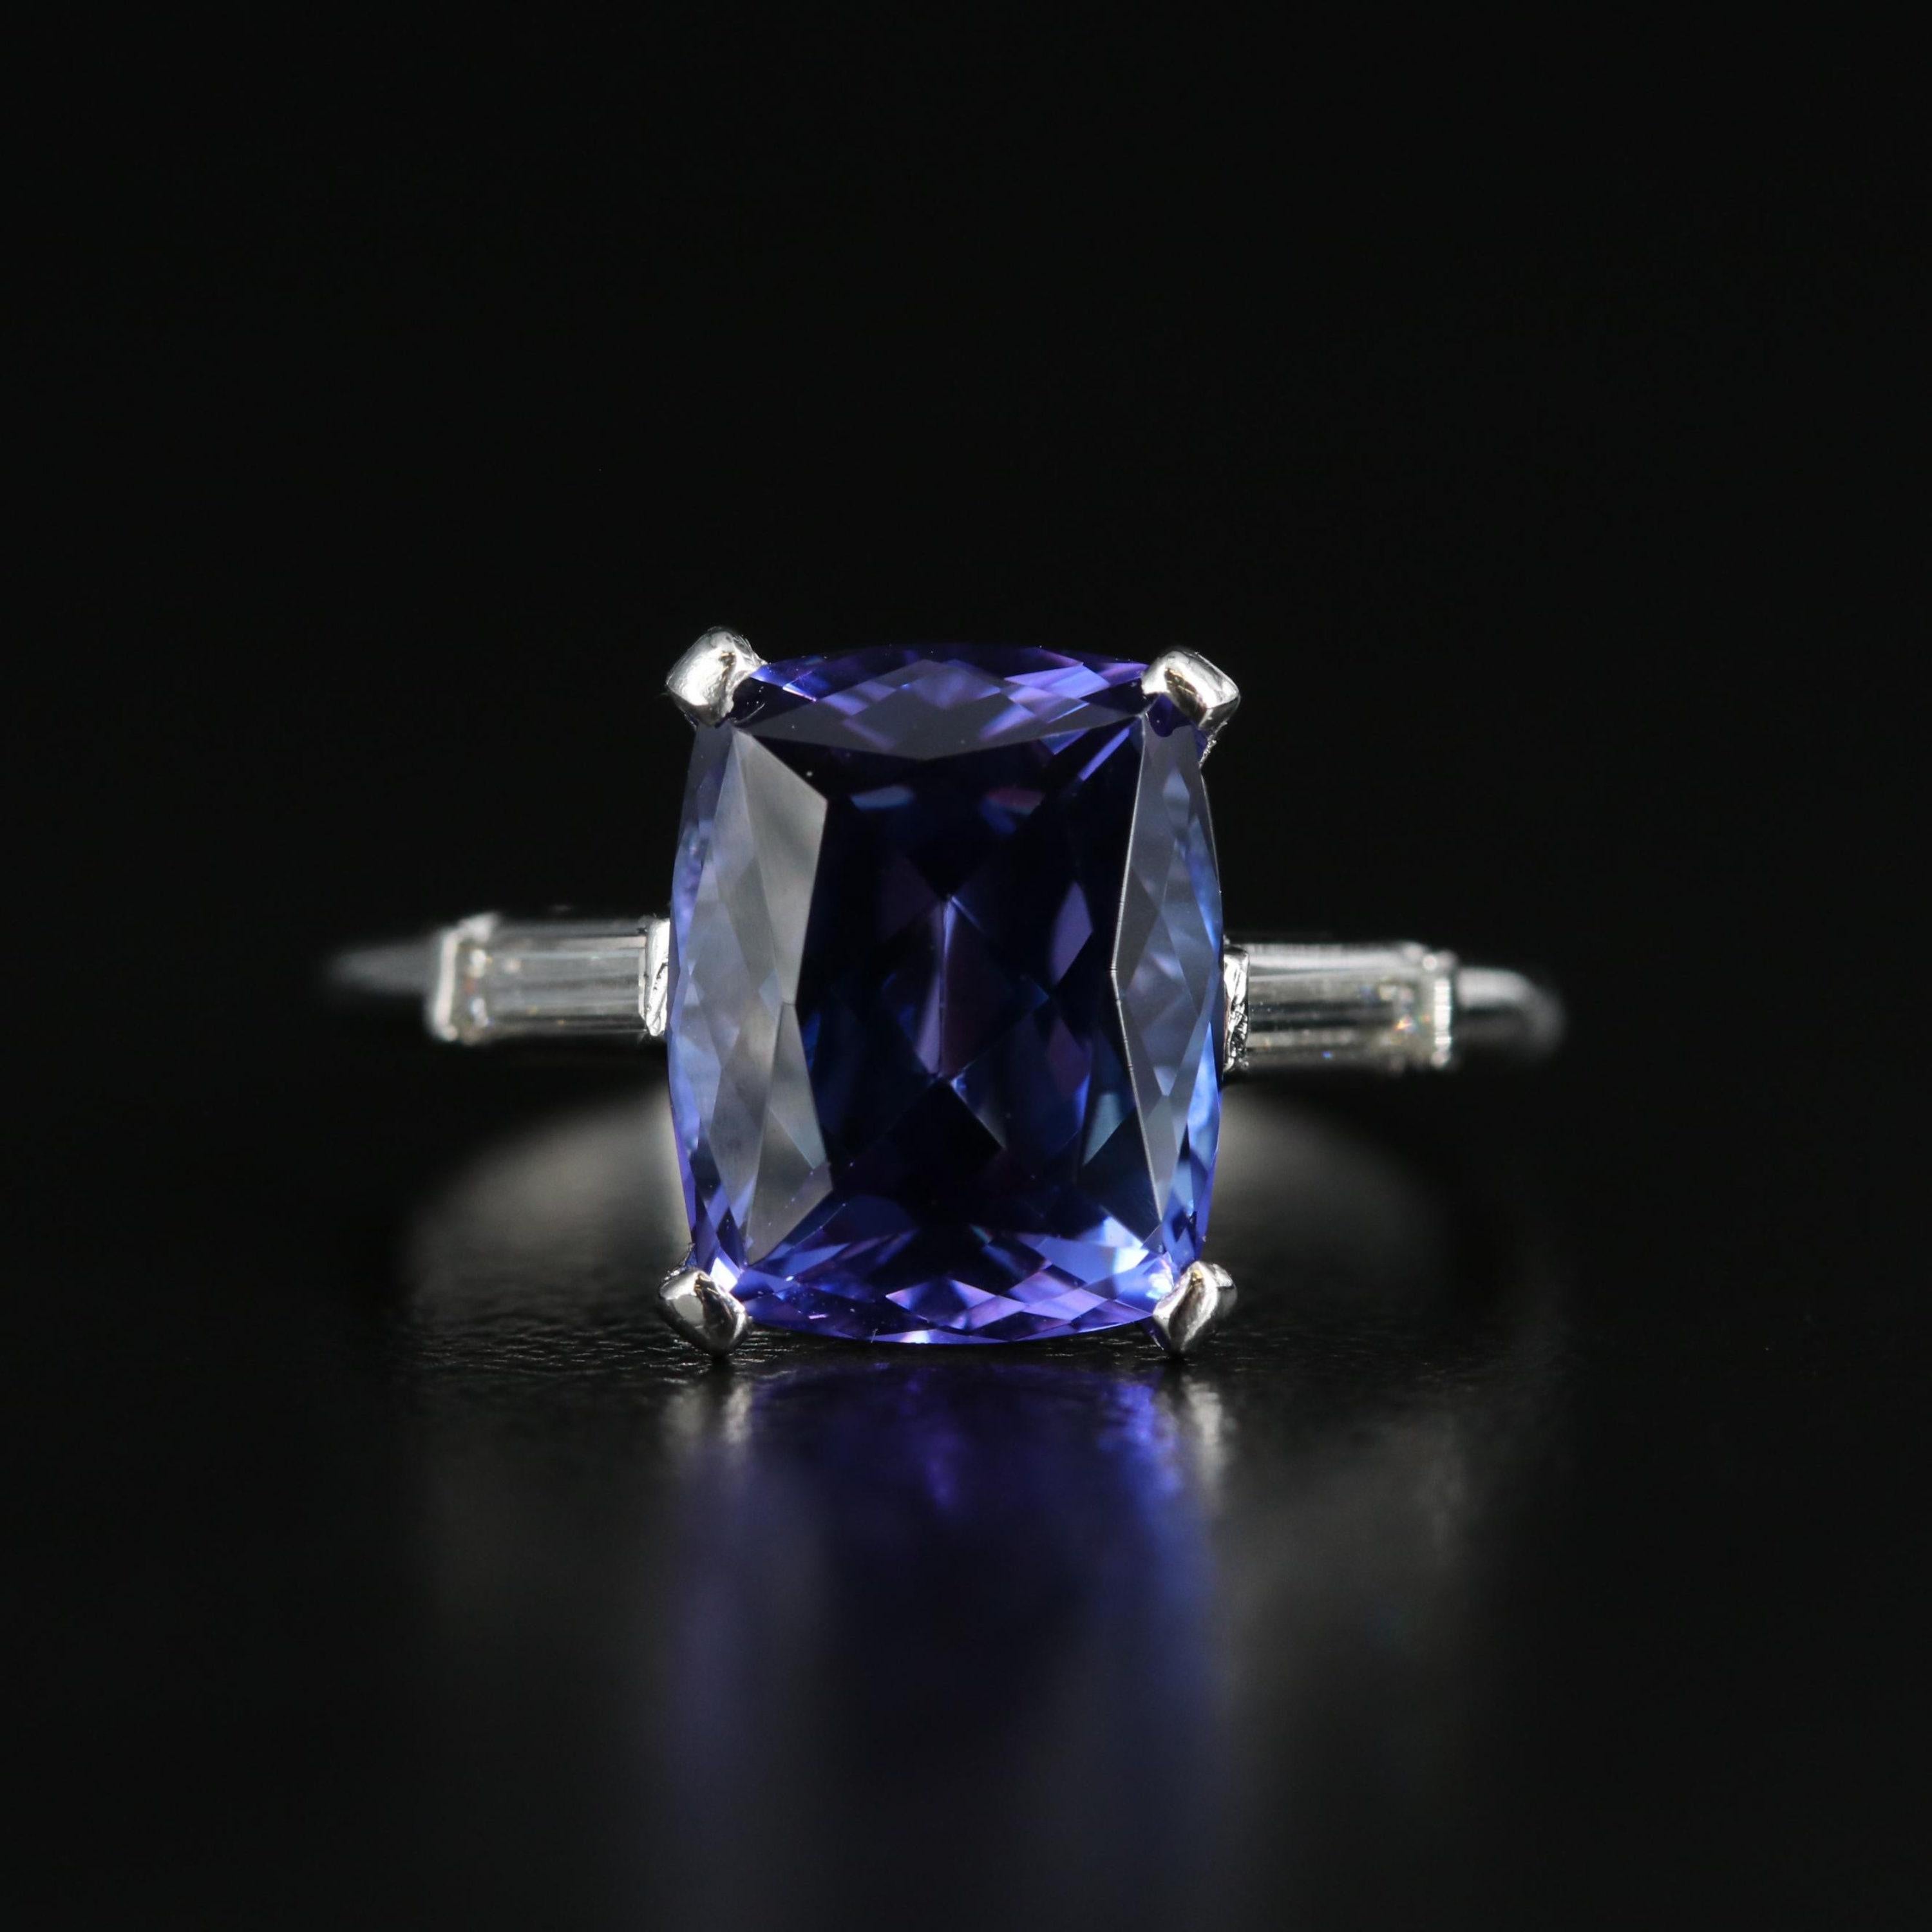 For Sale:  Antique 3.56 Carat Natural Tanzanite Diamond Engagement Ring in 18K Gold 5